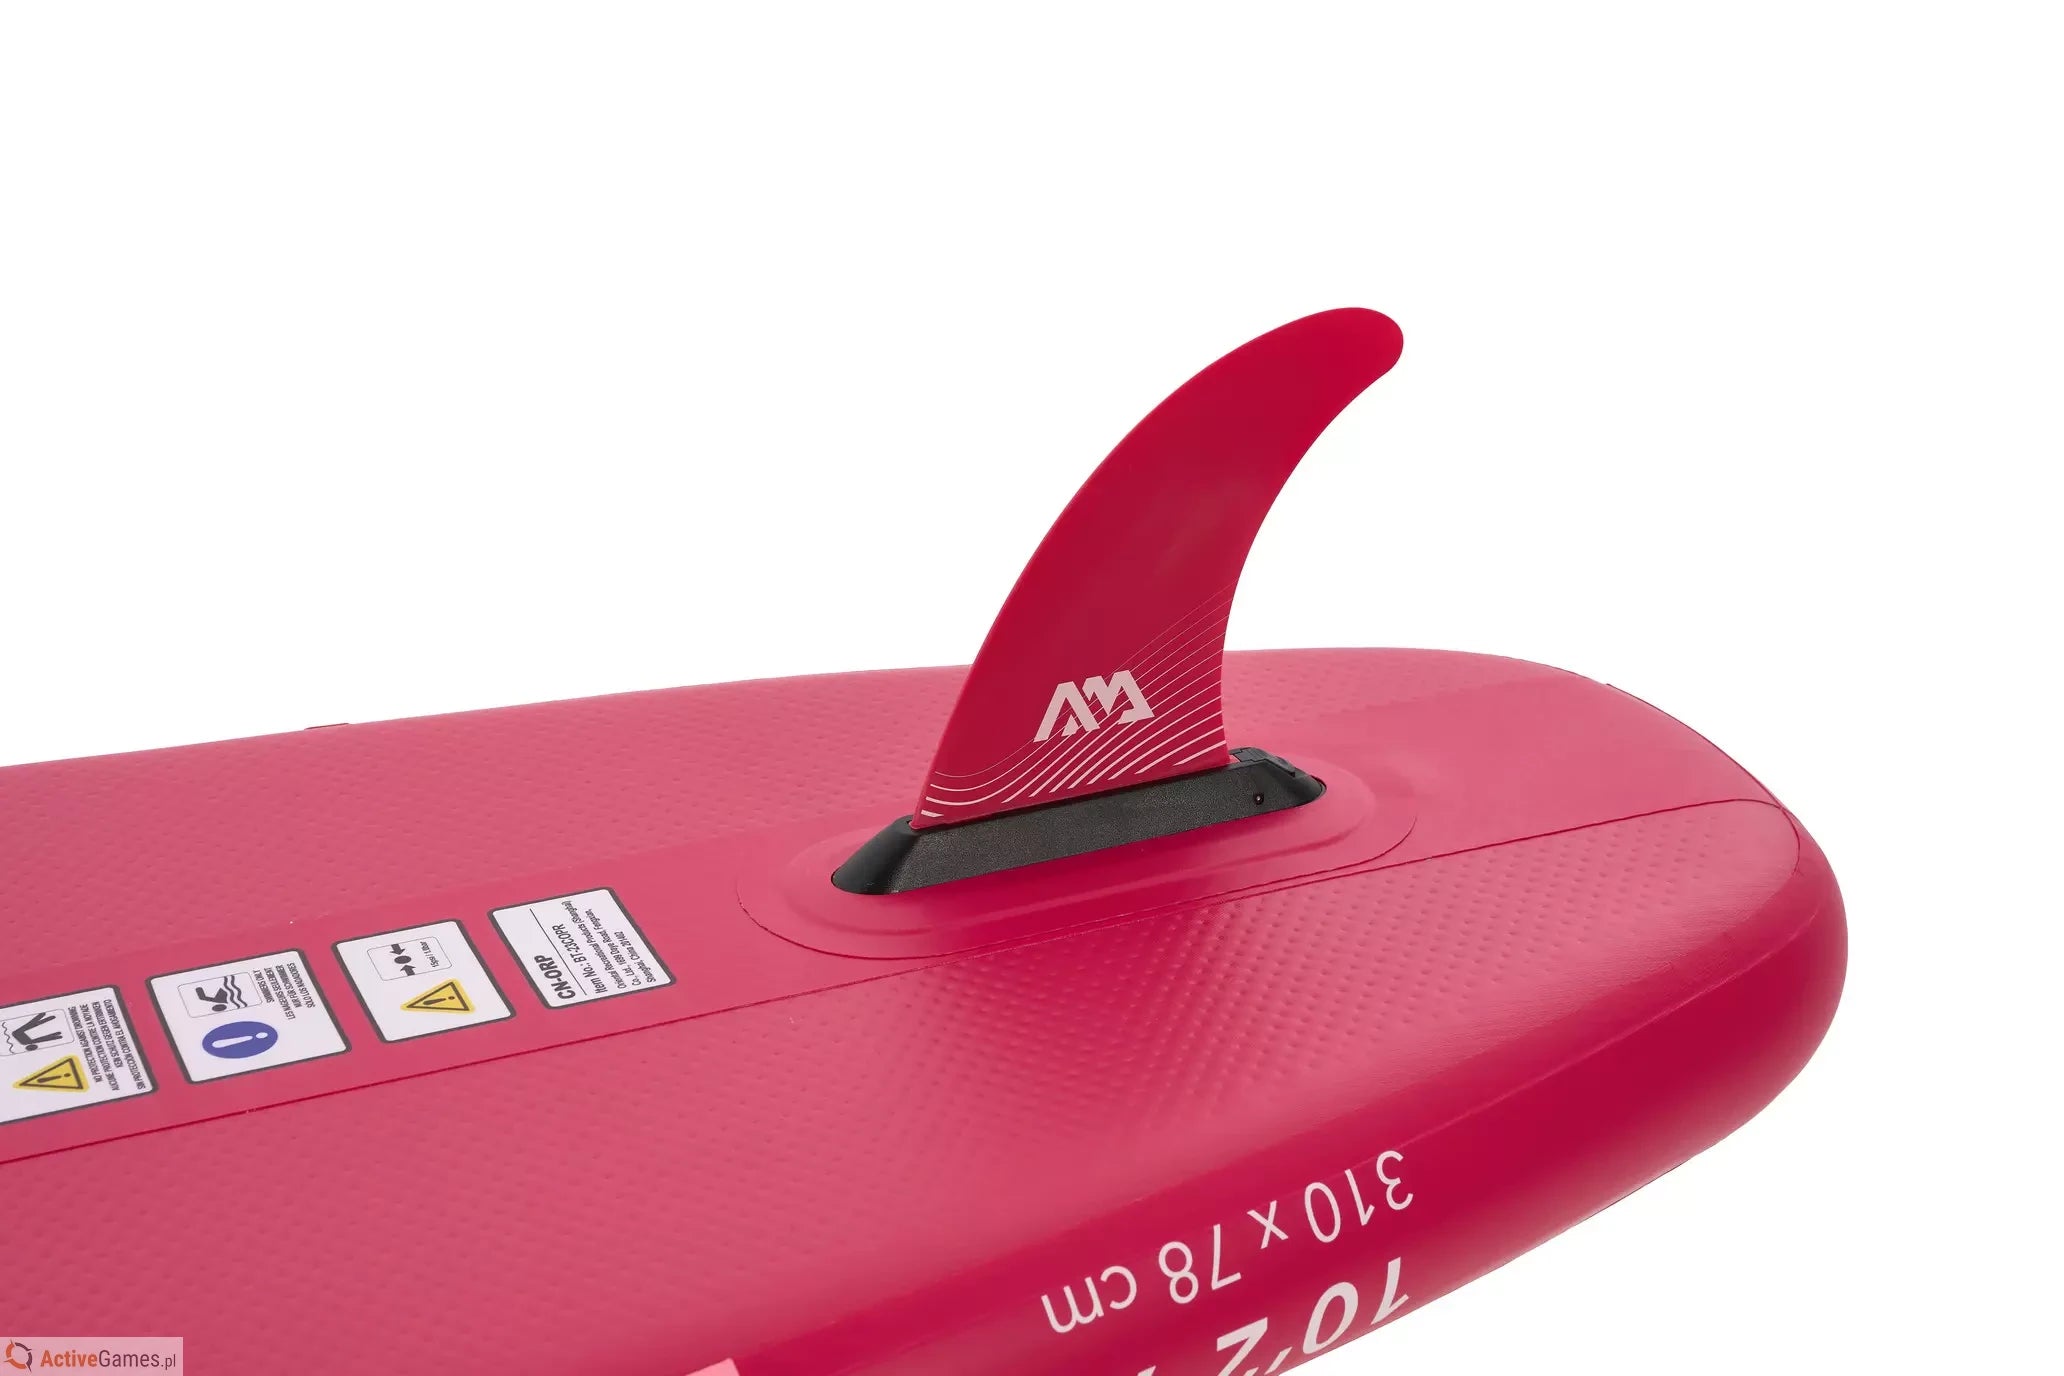 Aqua Marina - Coral (Raspberry) - Advanced All-around iSUP, 3.1m/12cm, with carbon/fiberglass hybrid PASTEL paddle, coil leash and carry strap  | BT-23COPR